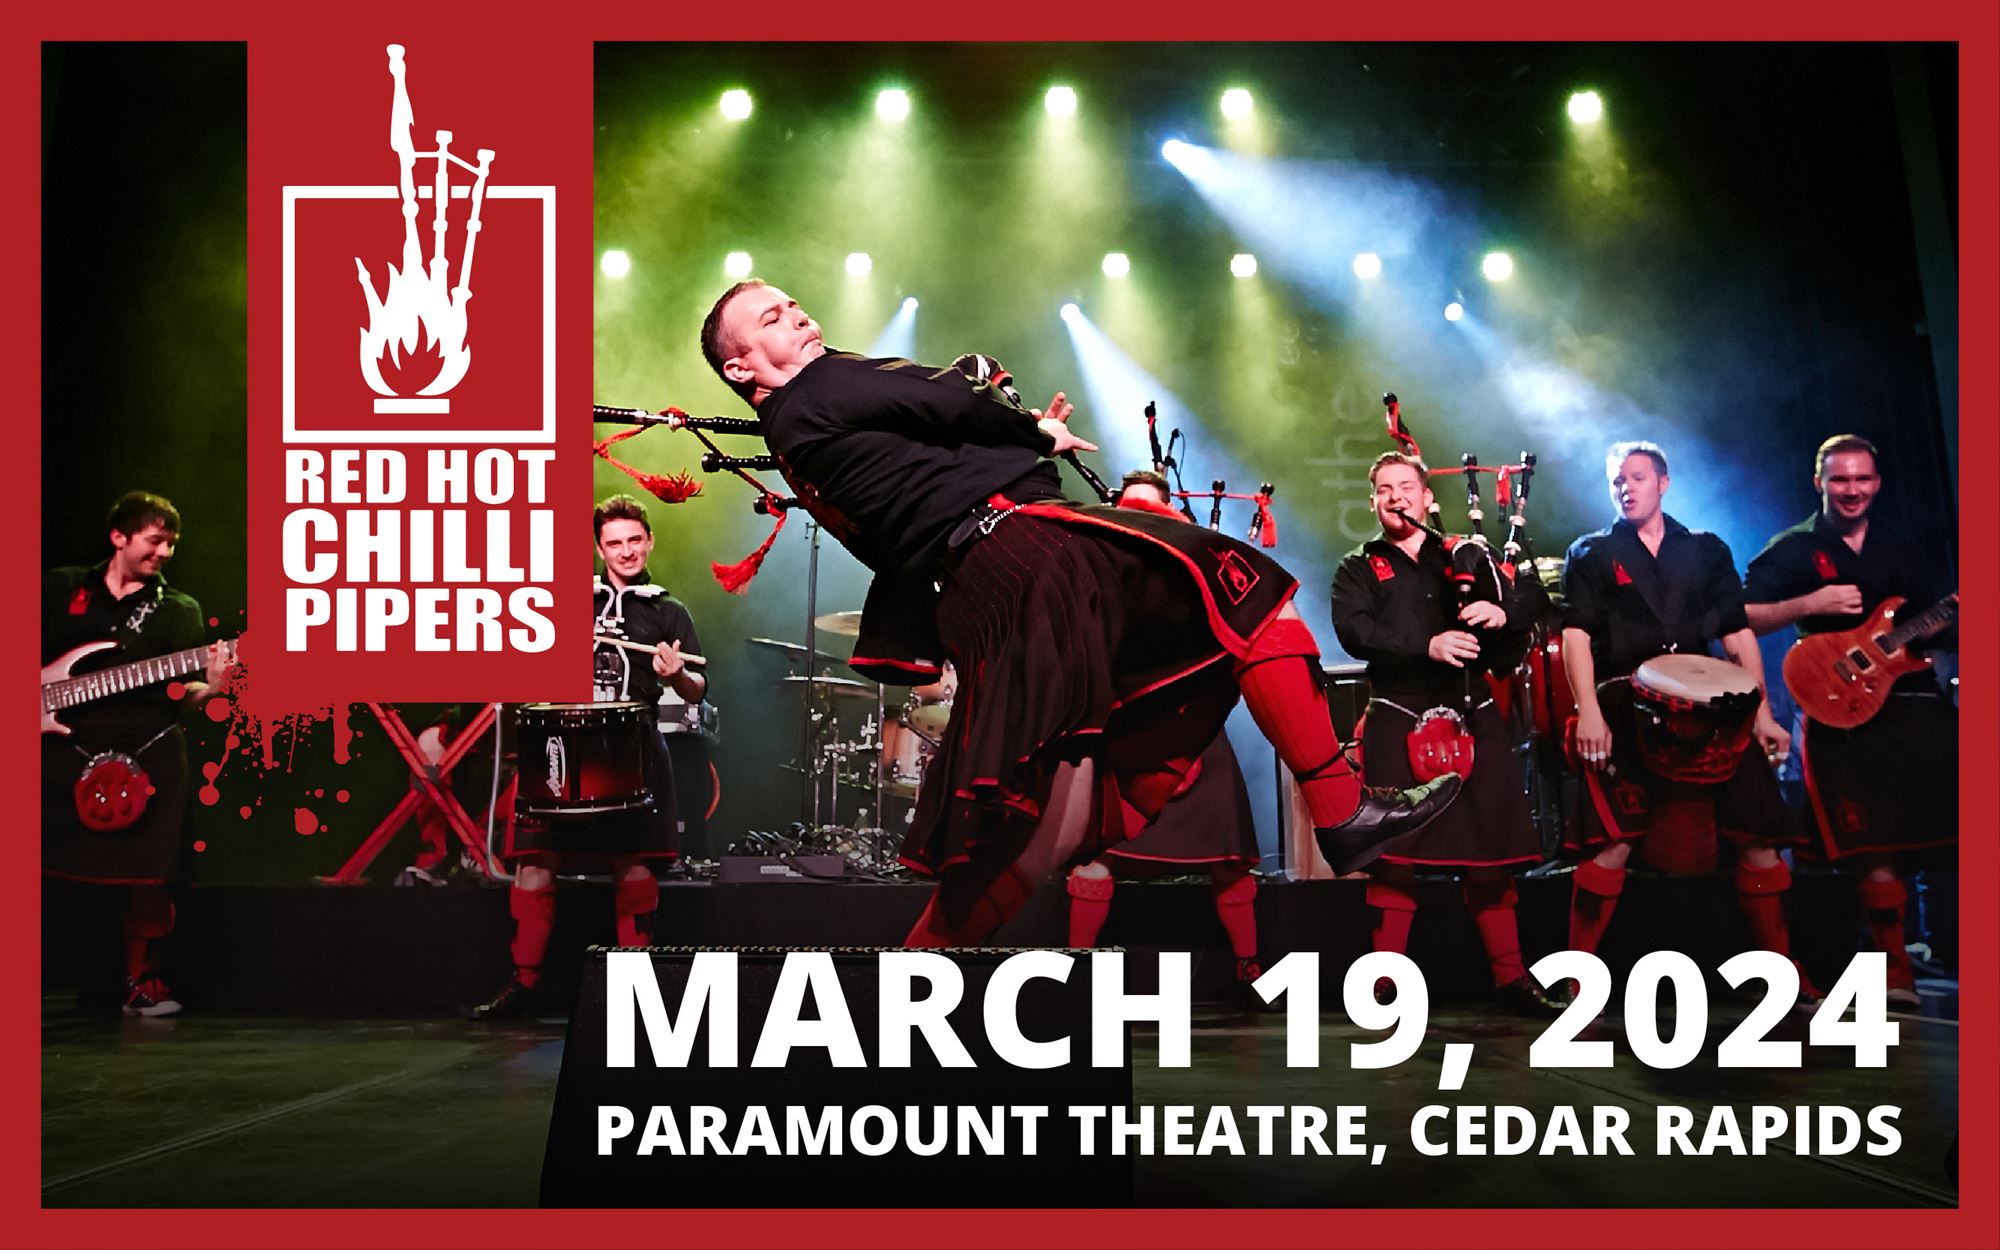 Red Hot Chilli Pipers Tour 2024 Rocking the Stage with Fiery Performances